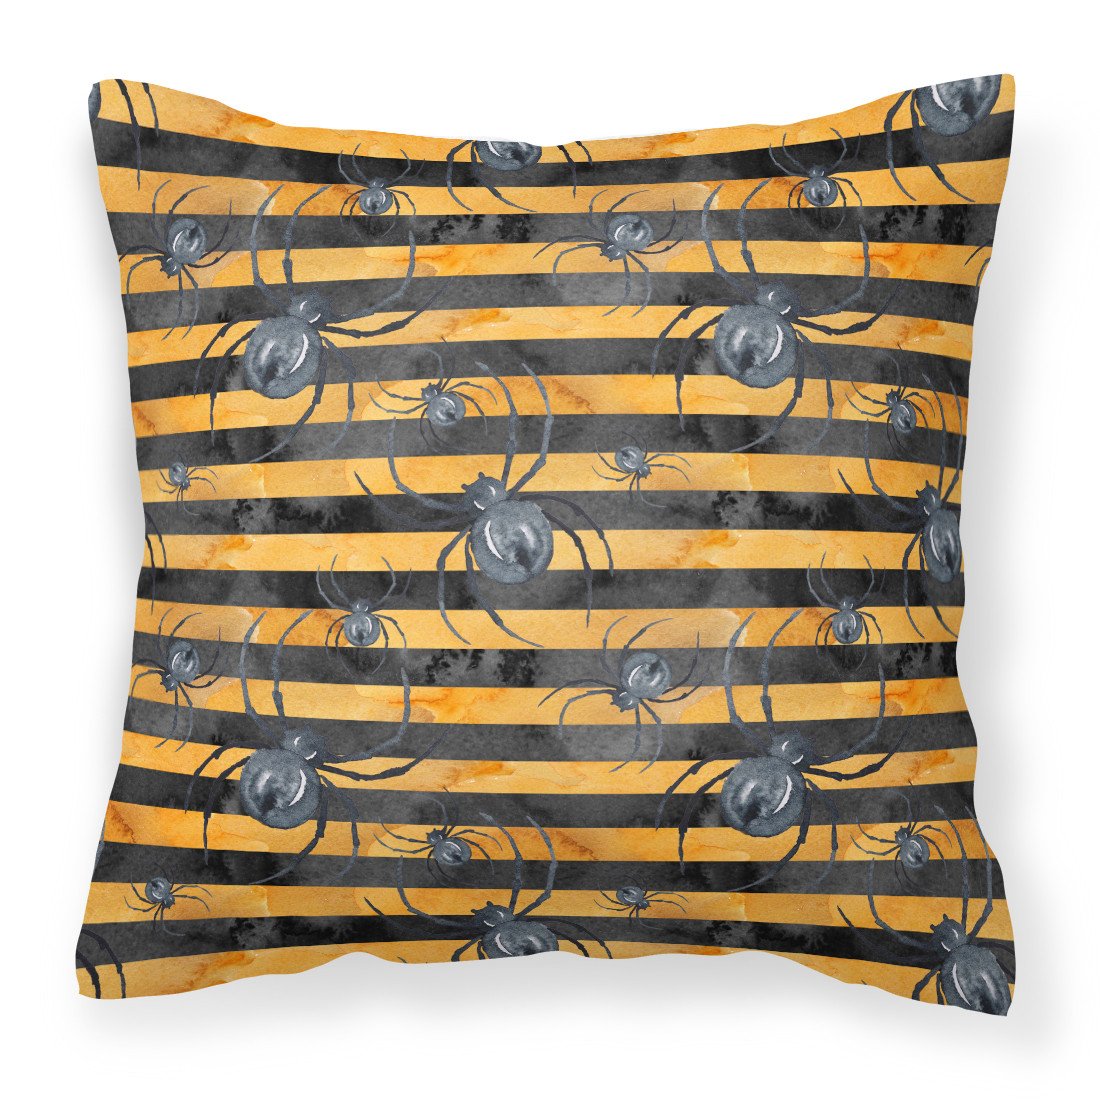 Watecolor Halloween Spiders Fabric Decorative Pillow BB7526PW1818 by Caroline's Treasures